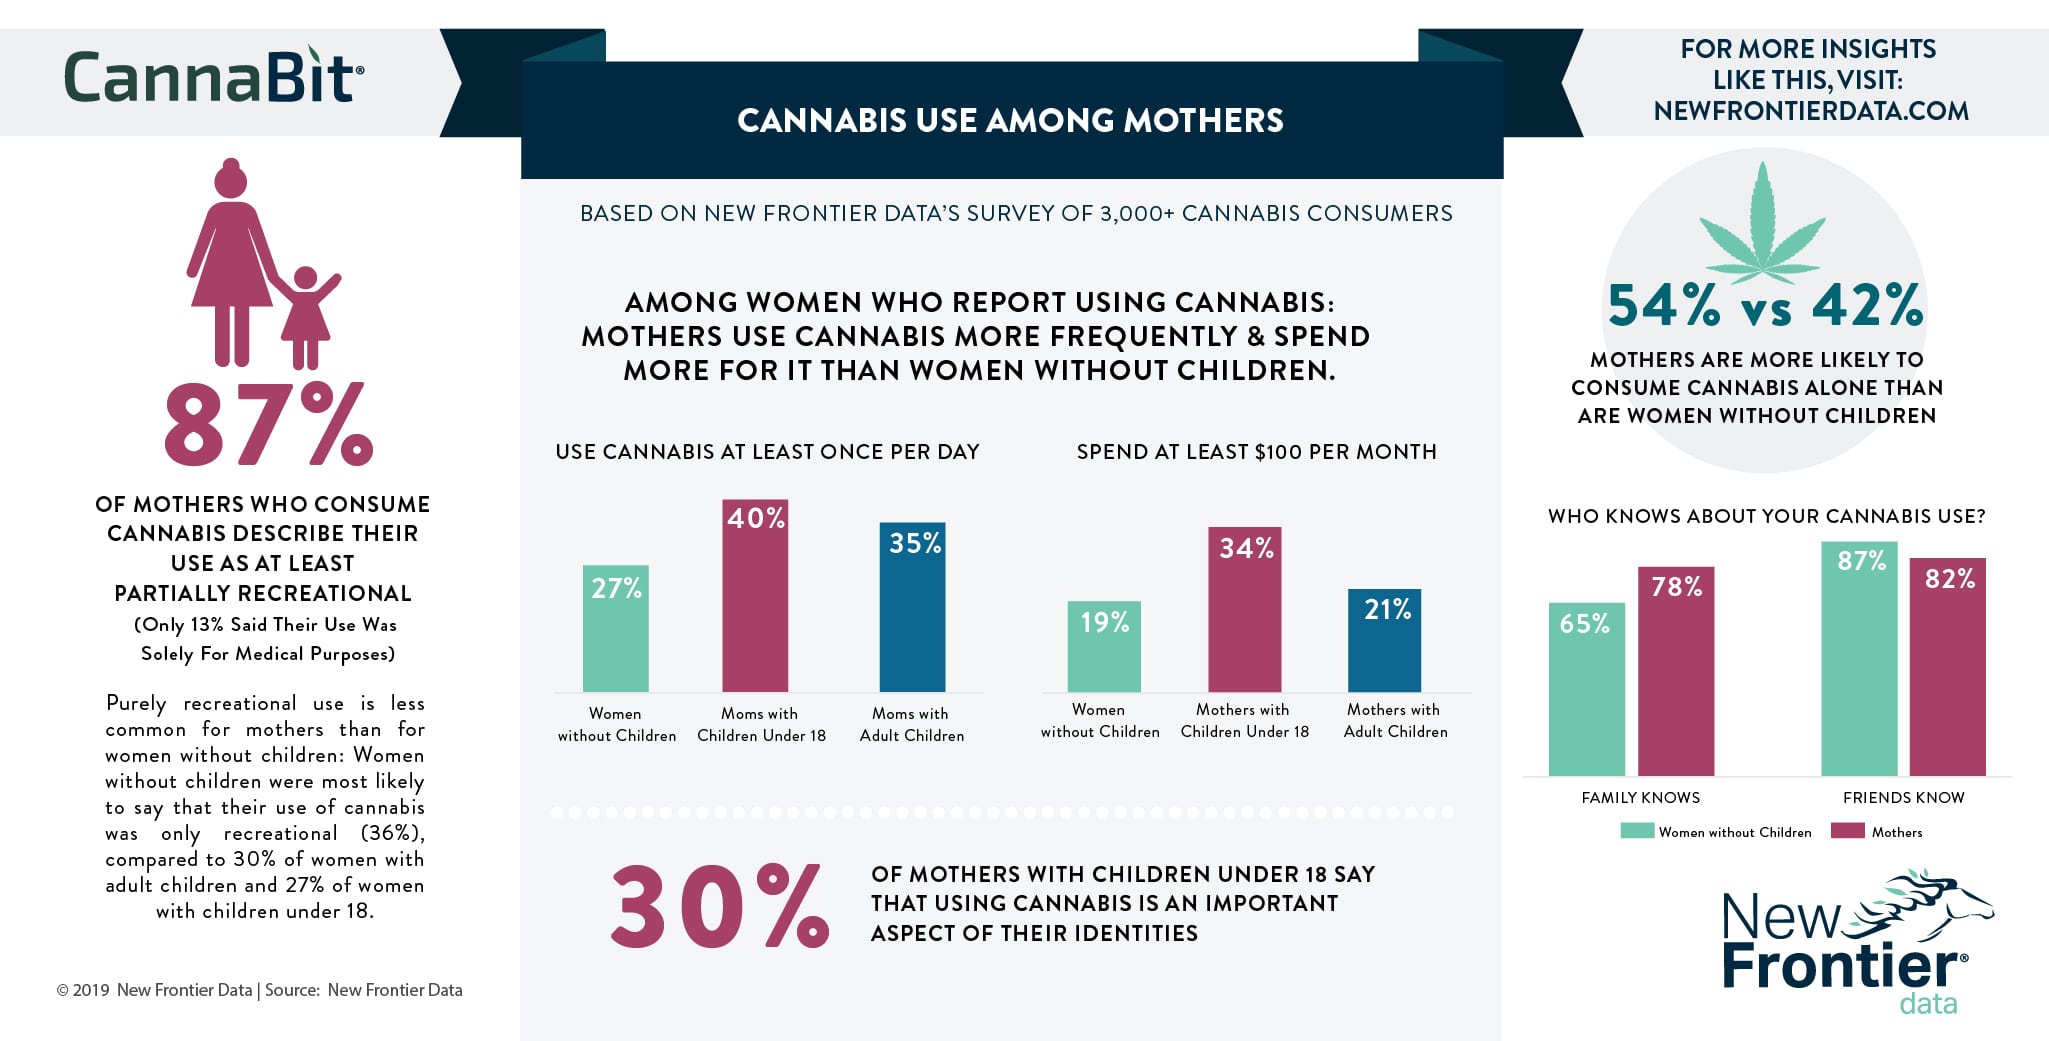 Cannabis Use Among Mothers New Frontier Data